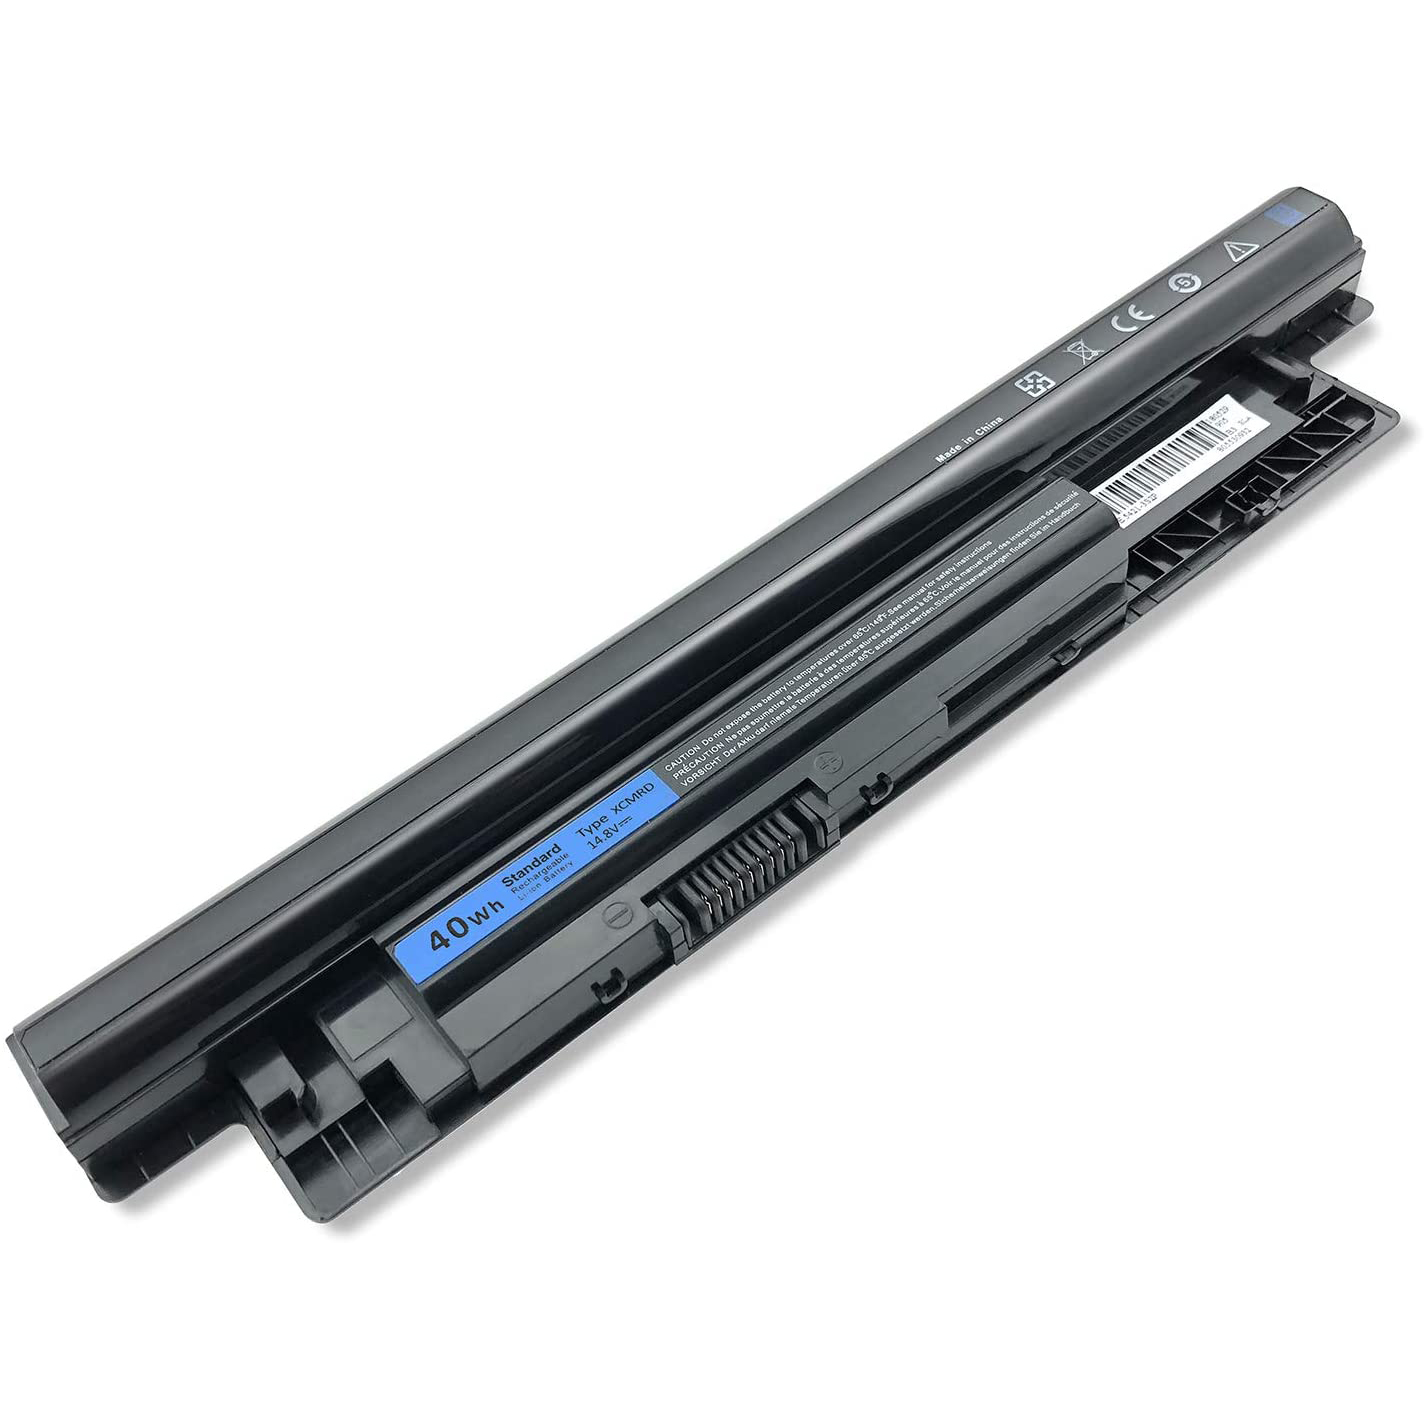 BATTERY FOR NOTEBOOK DELL INSPIRON XCMRD 15-3000 15-3521 15-3537 15-3541 15-3542 15-5521 15-N3521 15-N5421 15-1528 M&M COPY ,Laptop Battery